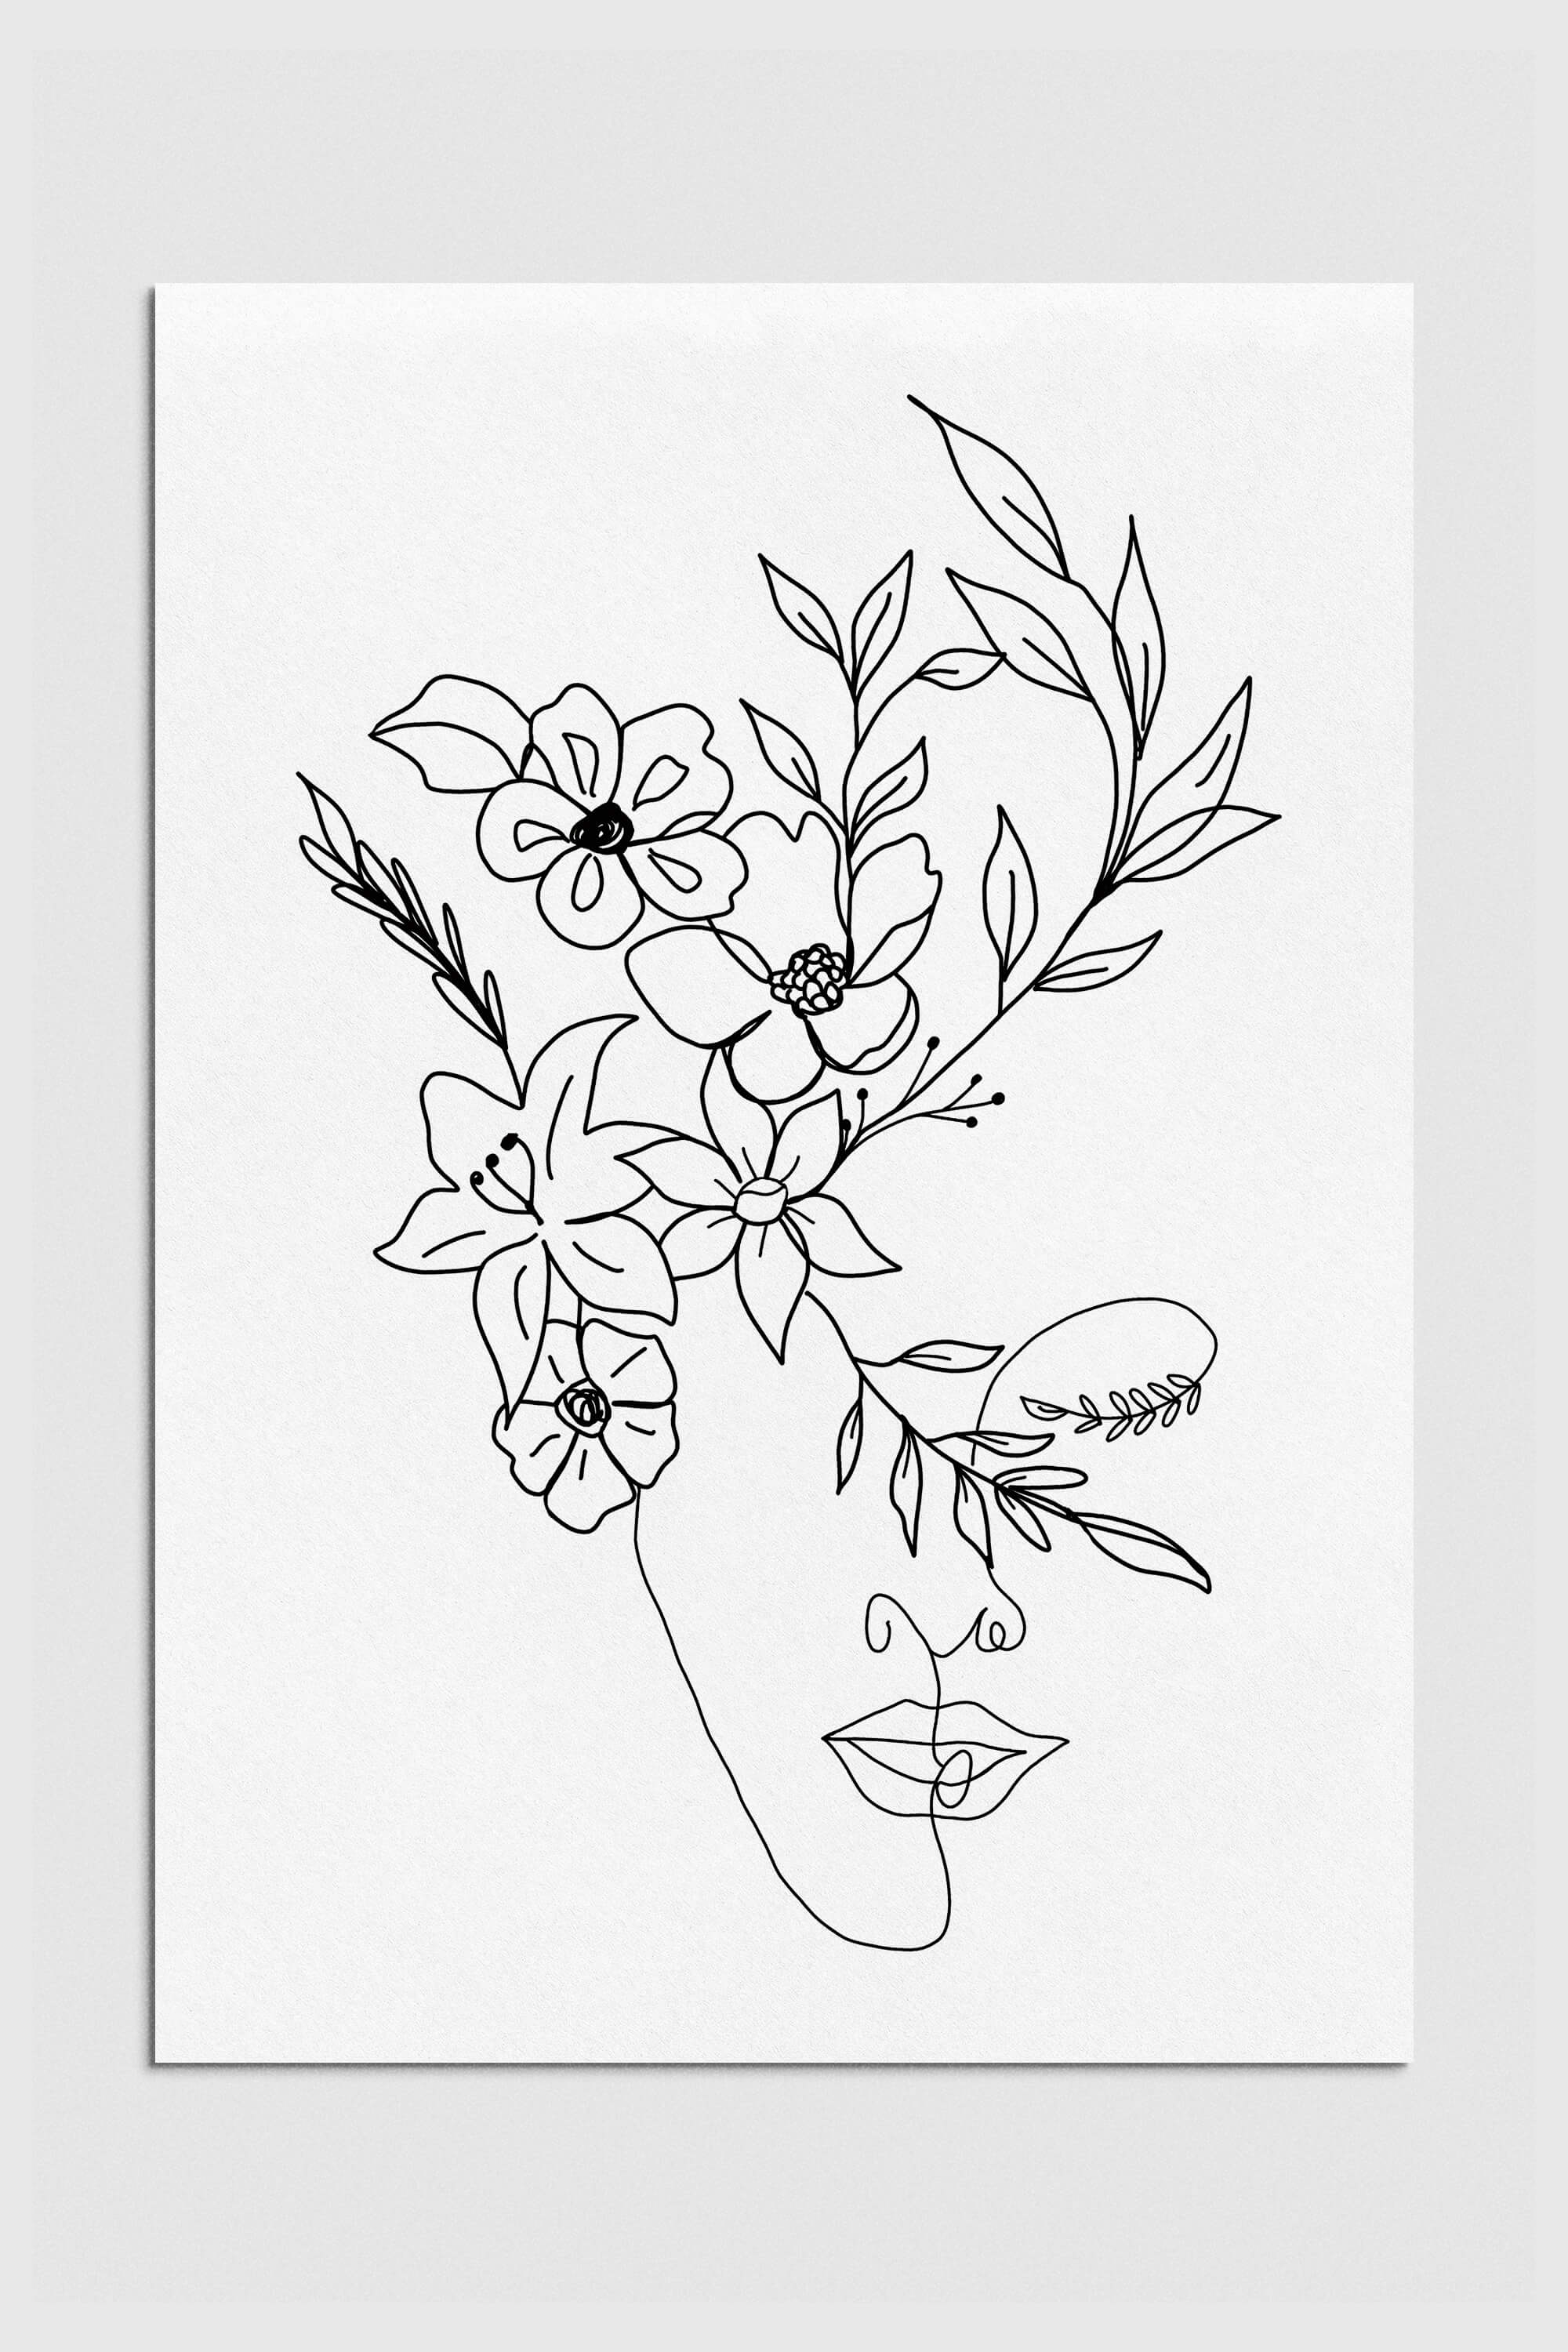 Sophisticated woman with floral face in black and white. Nature-inspired art print for home decor with a focus on elegance and femininity.